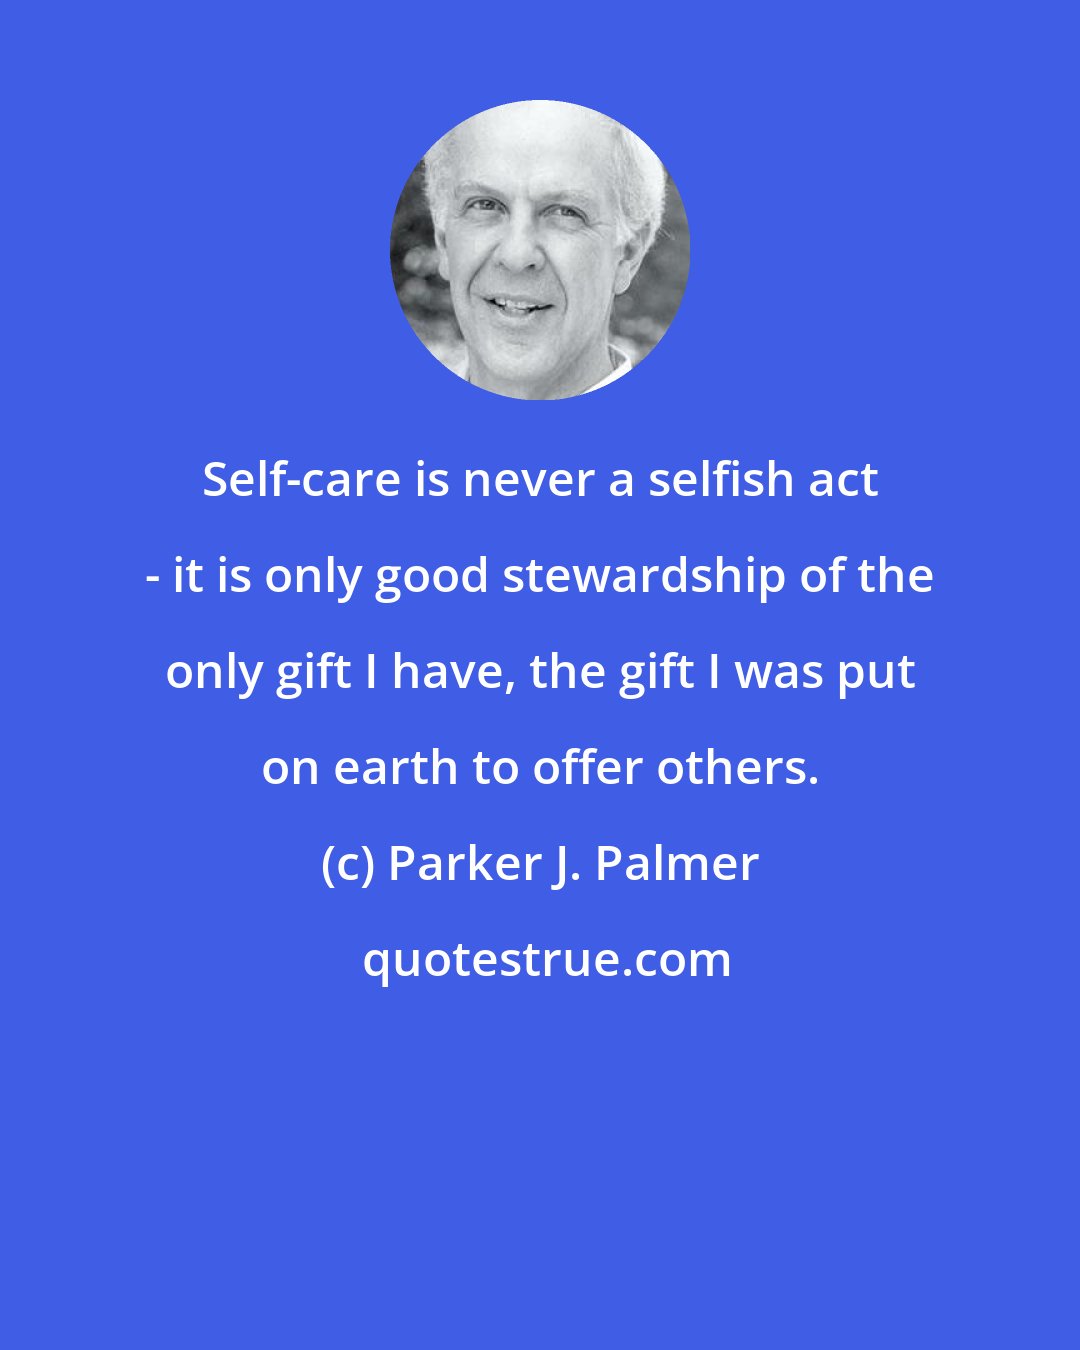 Parker J. Palmer: Self-care is never a selfish act - it is only good stewardship of the only gift I have, the gift I was put on earth to offer others.